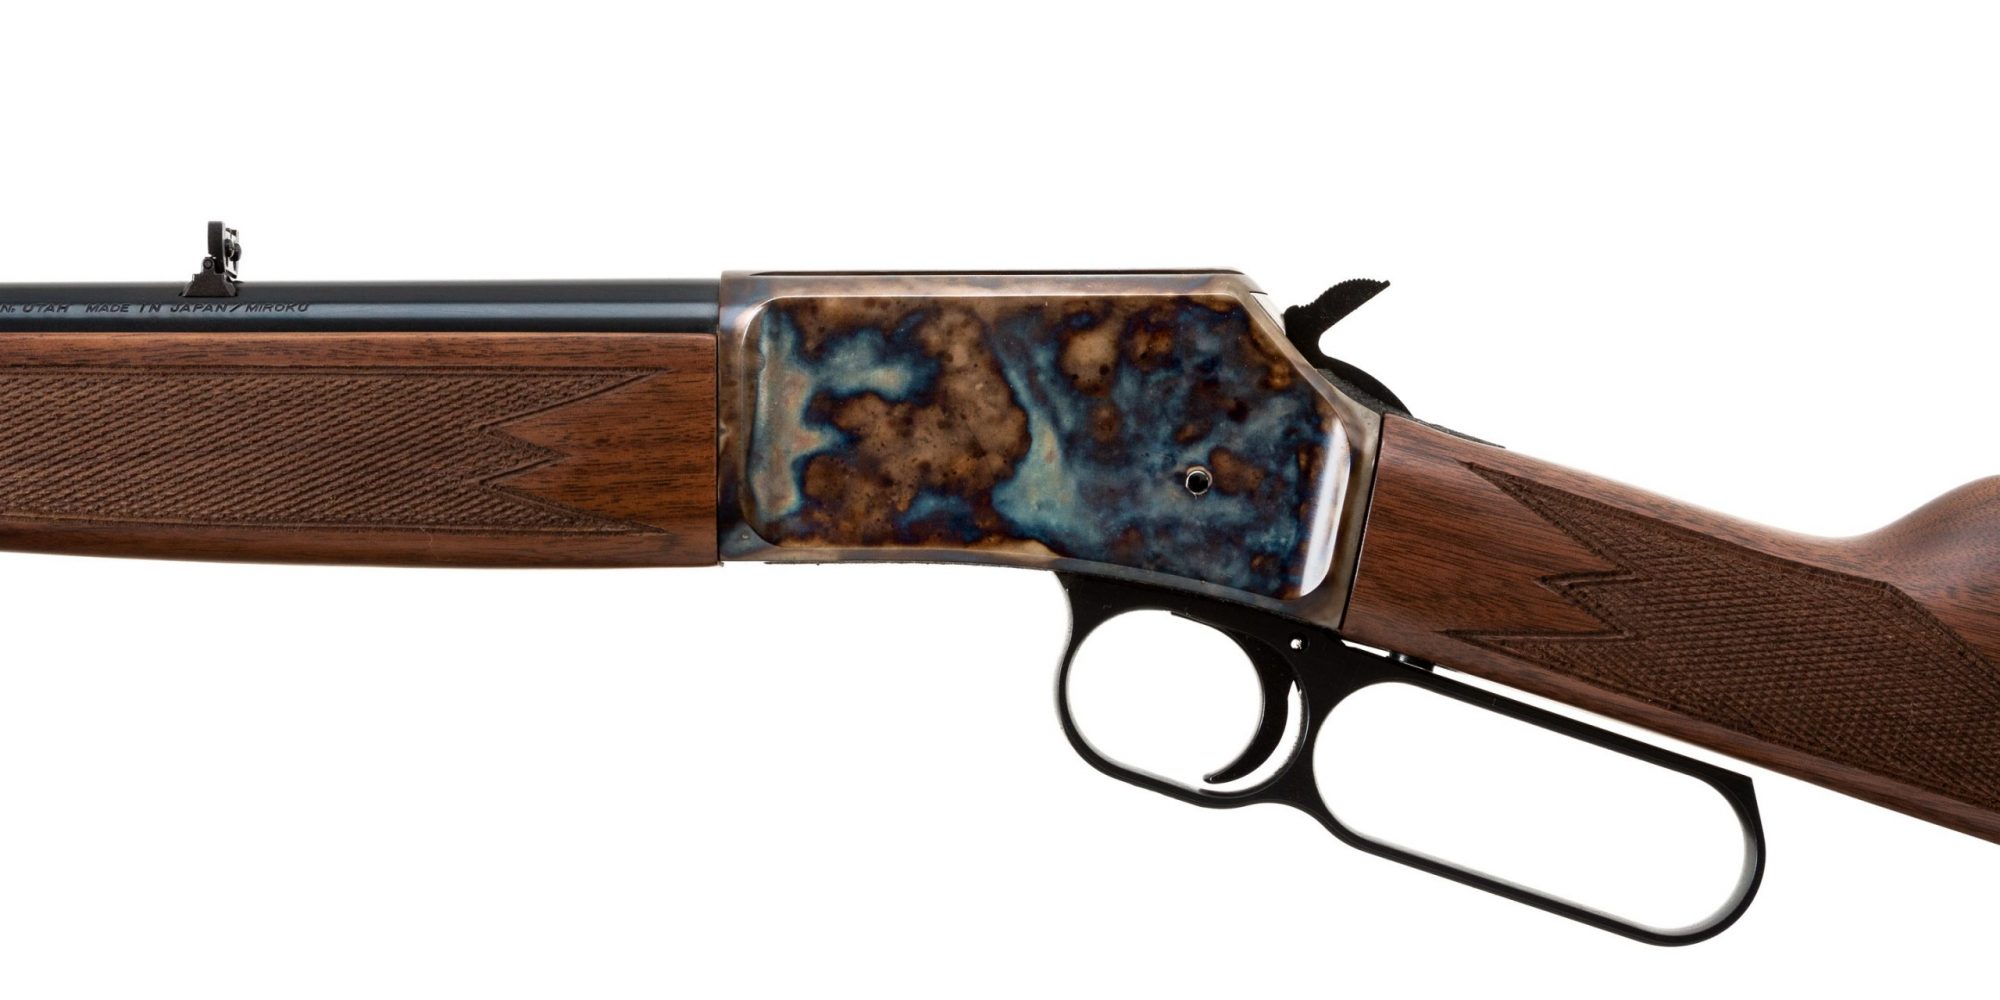 Photo of a Turnbull finished Browning BL-22 with upgraded walnut stocks, featuring bone charcoal color case hardening by Turnbull Restoration of Bloomfield, NY